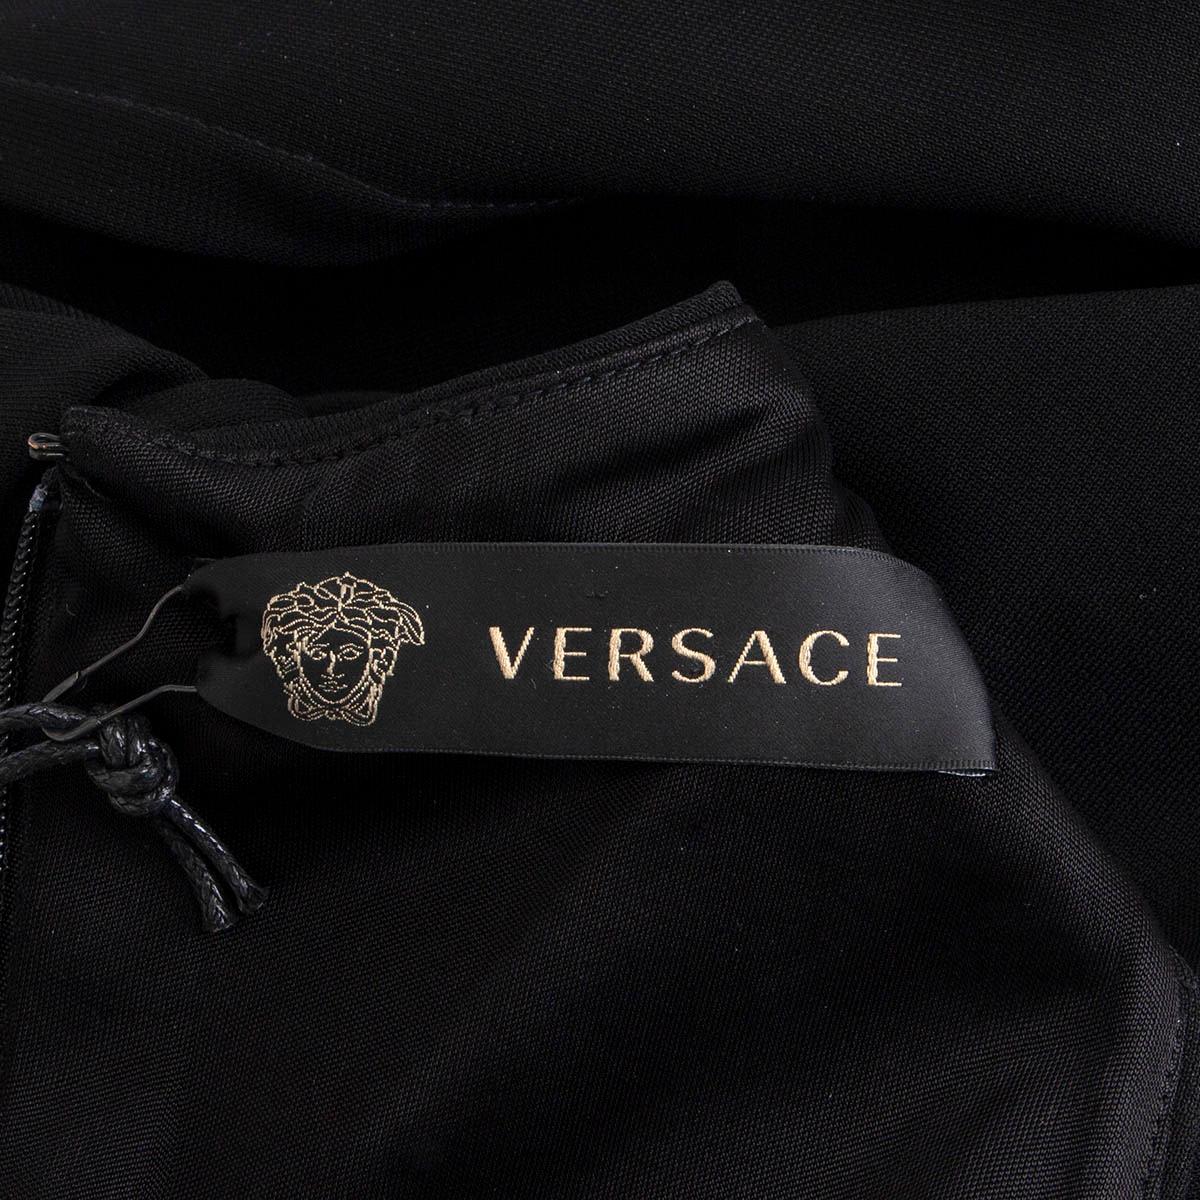 VERSACE black viscose 2016 DOUBLE KNOT CUT OUT MIDI Dress 38 XS In Excellent Condition For Sale In Zürich, CH